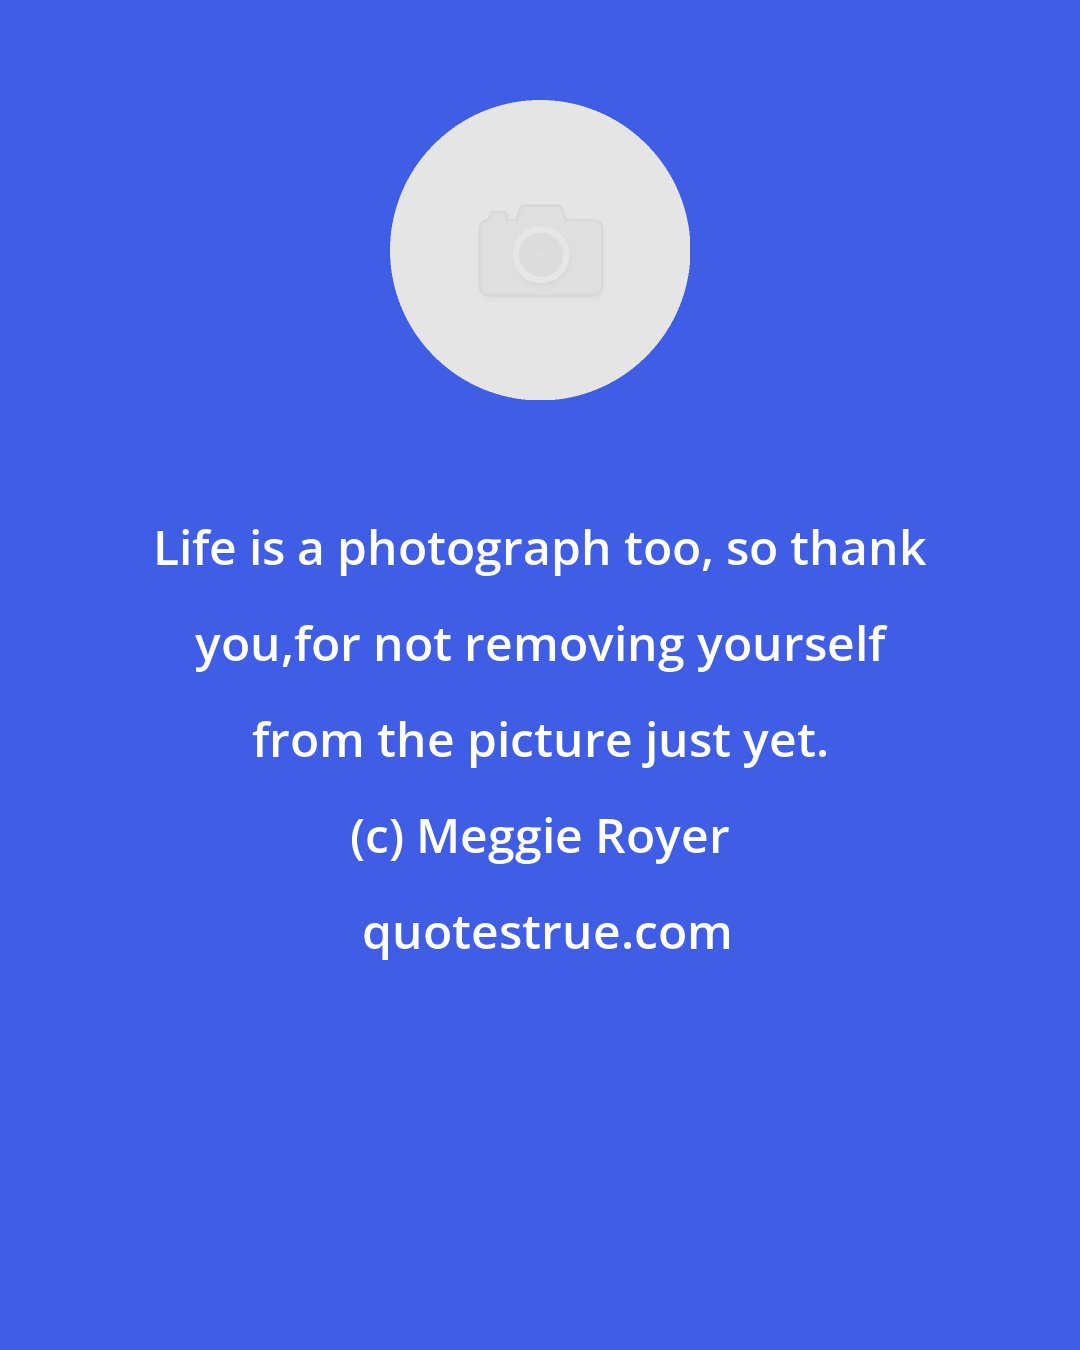 Meggie Royer: Life is a photograph too, so thank you,for not removing yourself from the picture just yet.